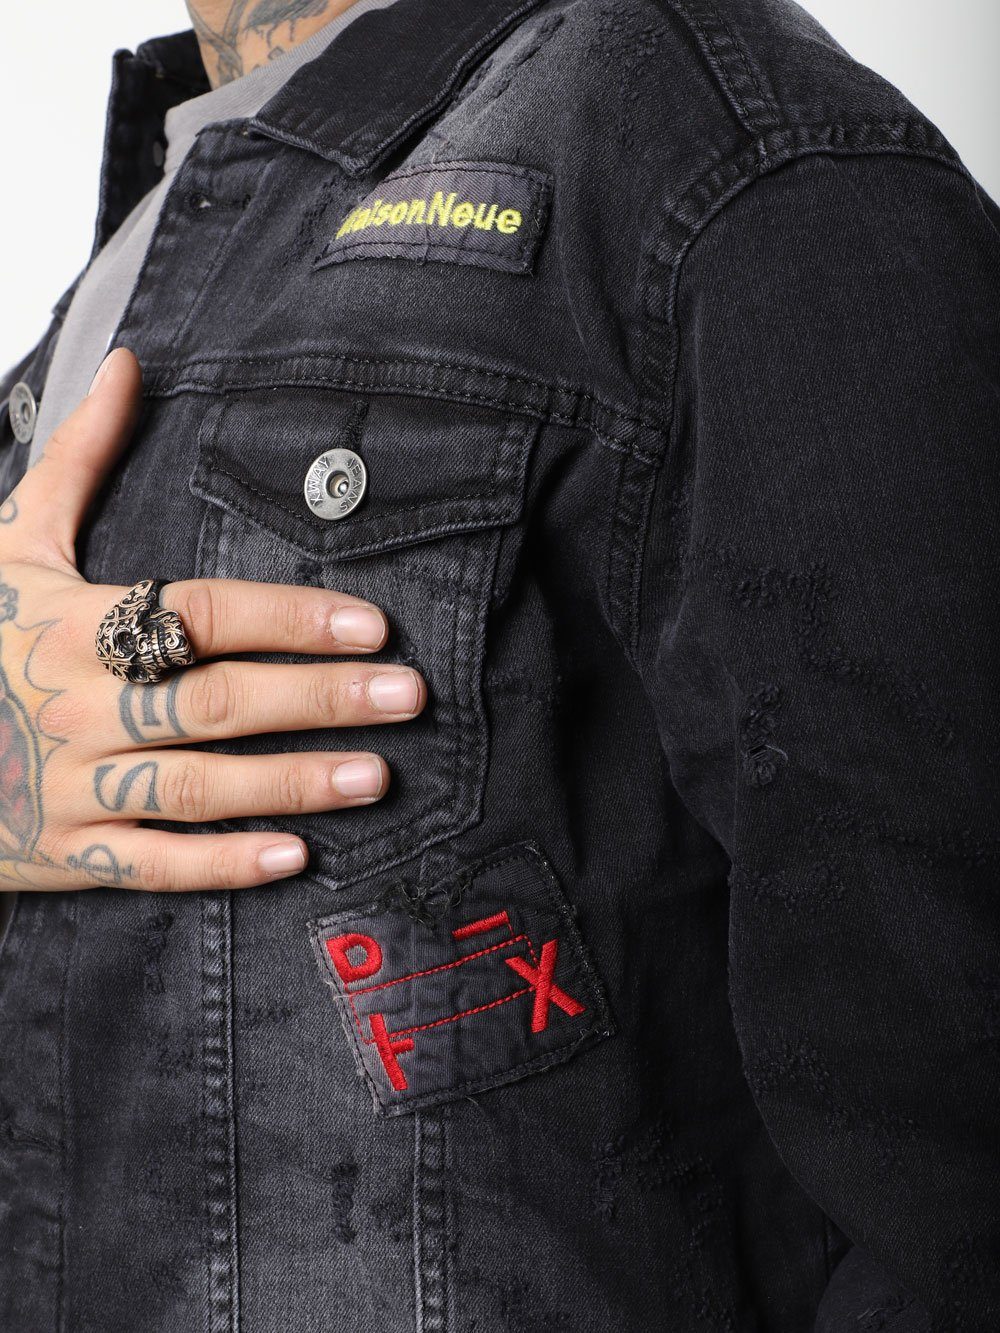 A man wearing a JETMAN denim jacket with patches on it.